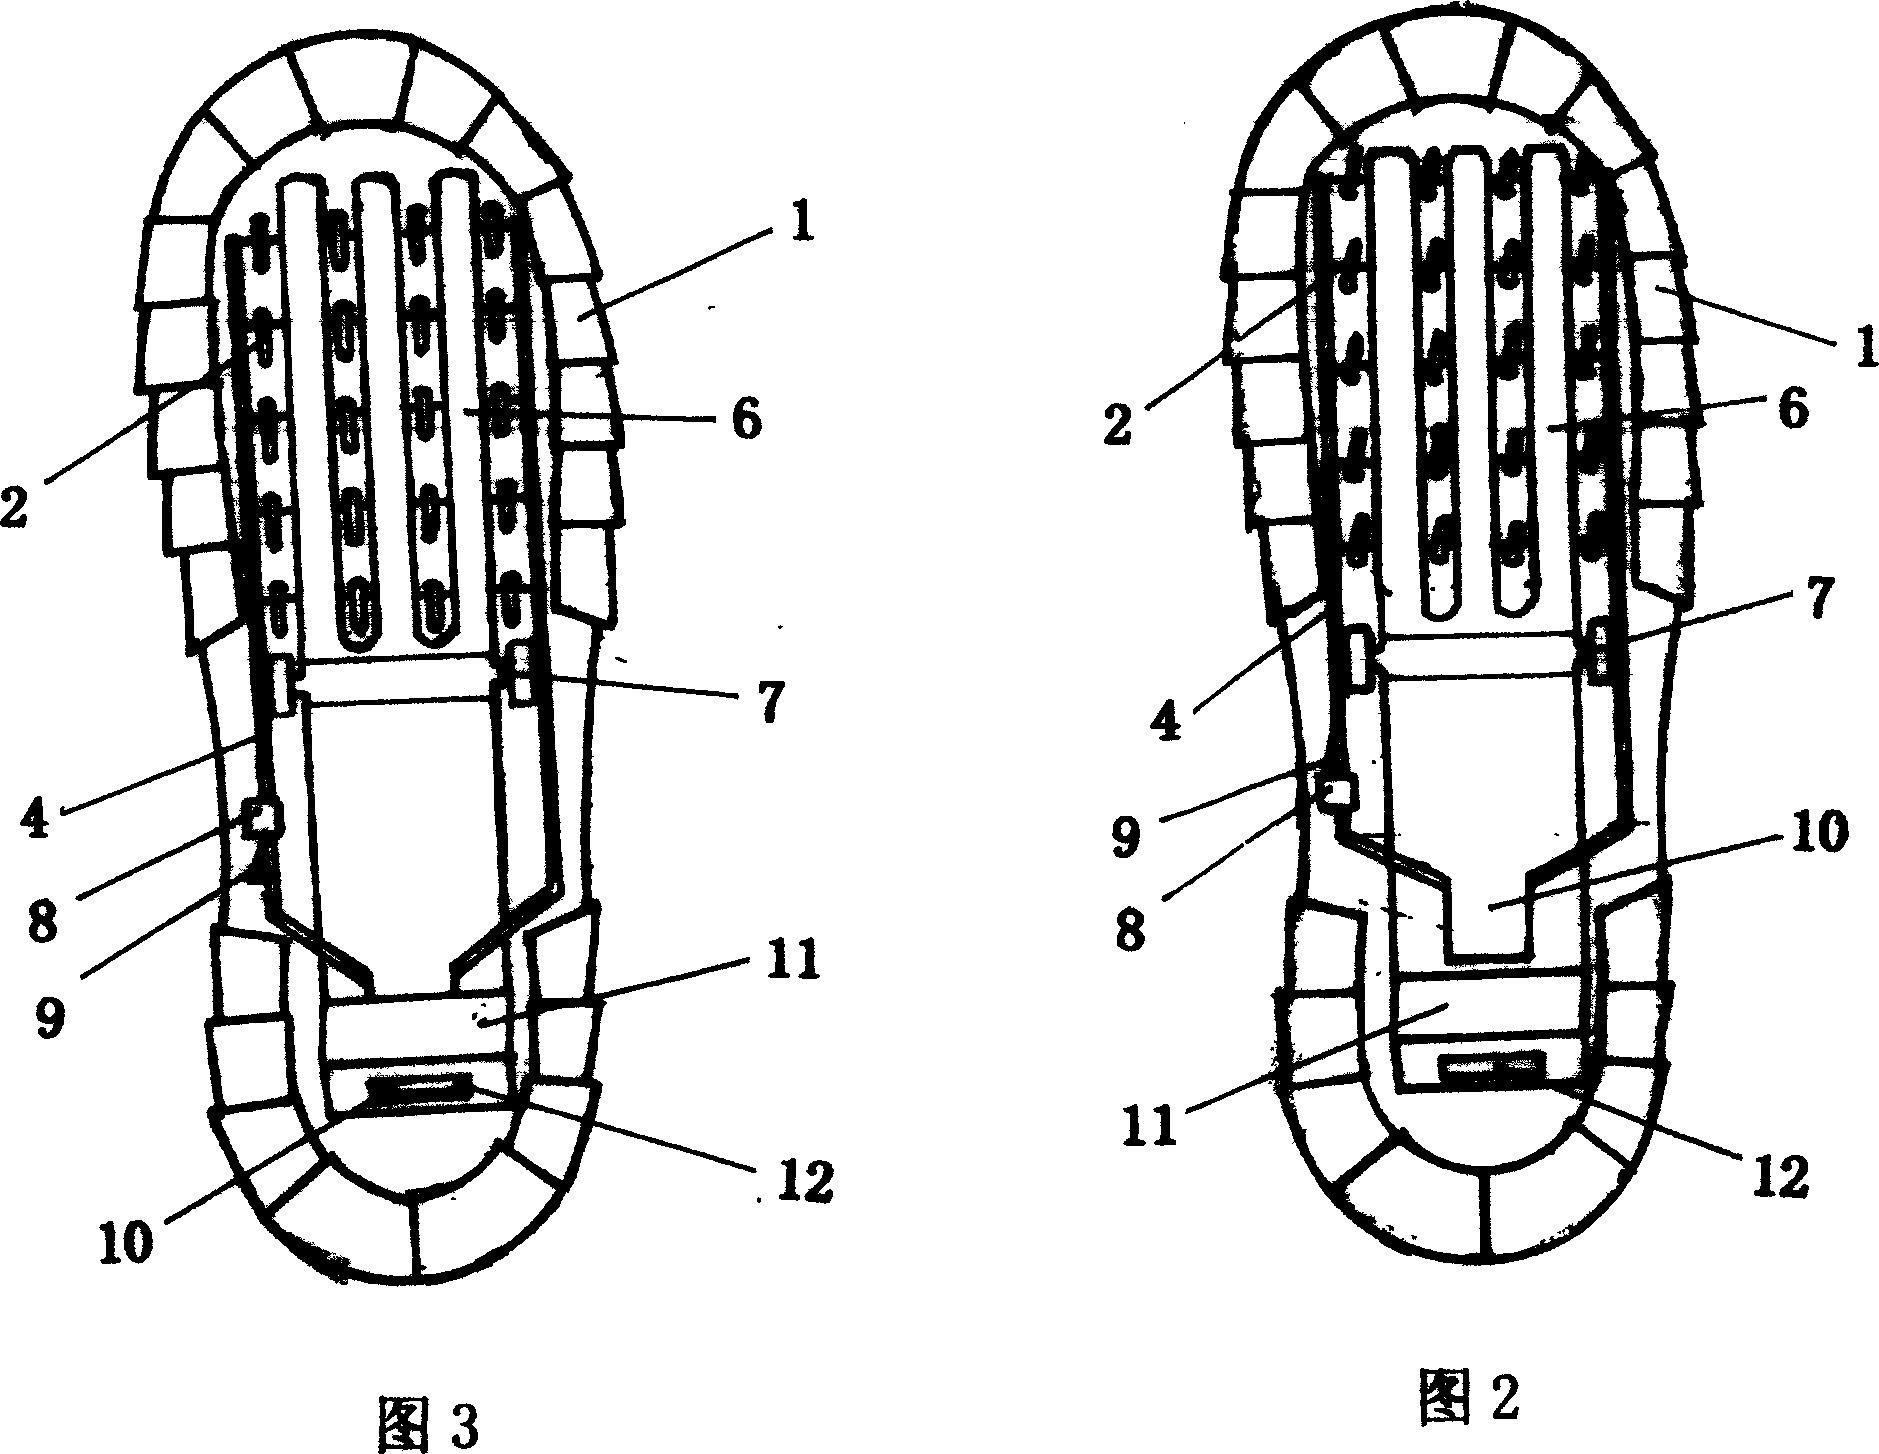 Snow shoes with anti-skid and snow-removal function